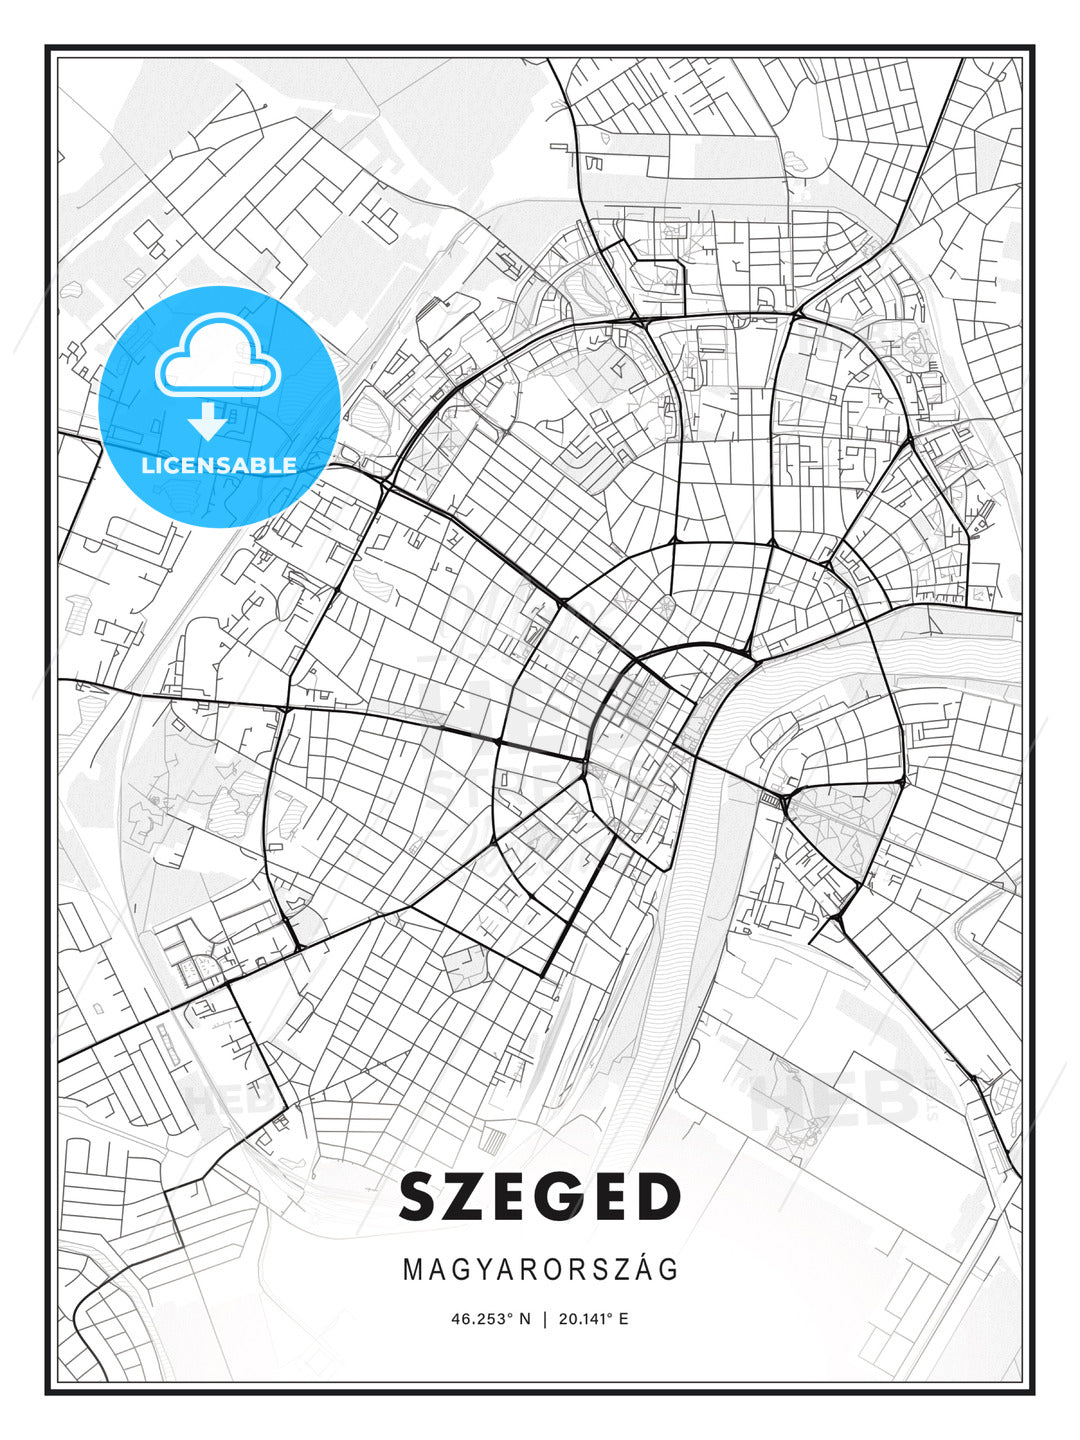 Szeged, Hungary, Modern Print Template in Various Formats - HEBSTREITS Sketches